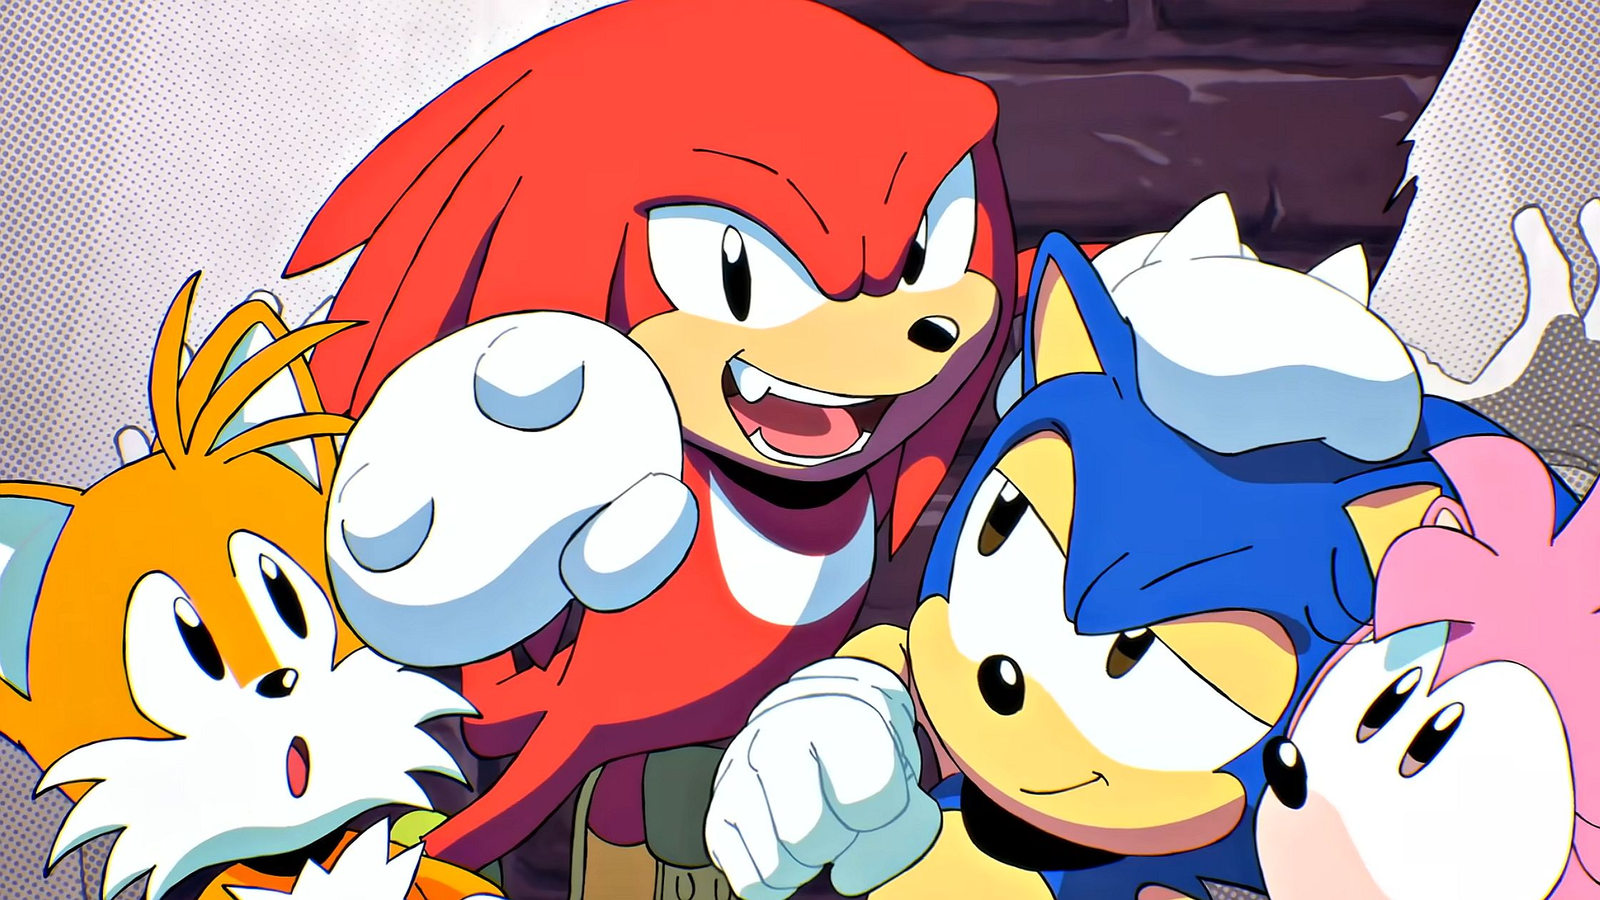 Sega Delisting Several Classic Sonic Titles From Digital Storefronts